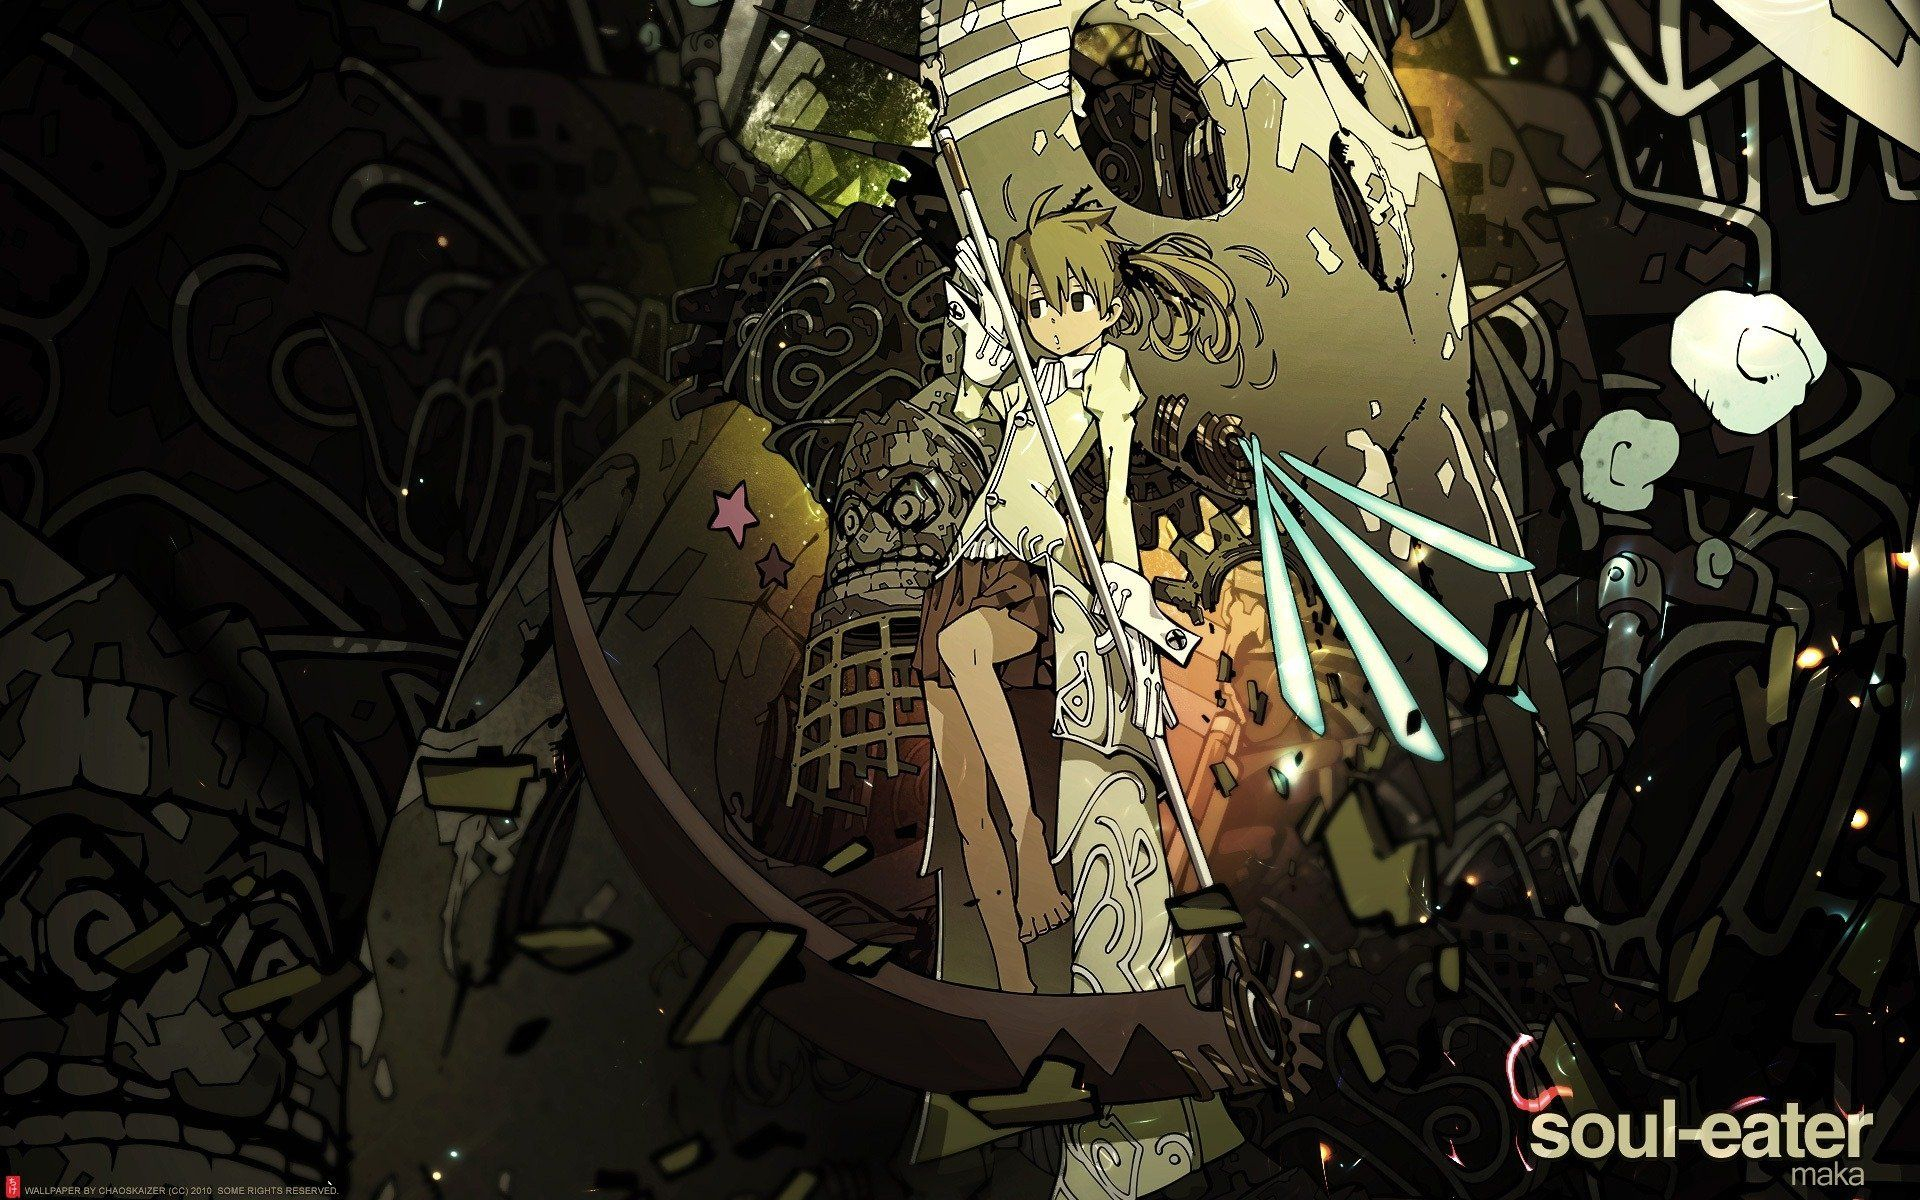 1920x1200 Soul Eater Anime Wallpapers Top Free Soul Eater Anime Backgrounds